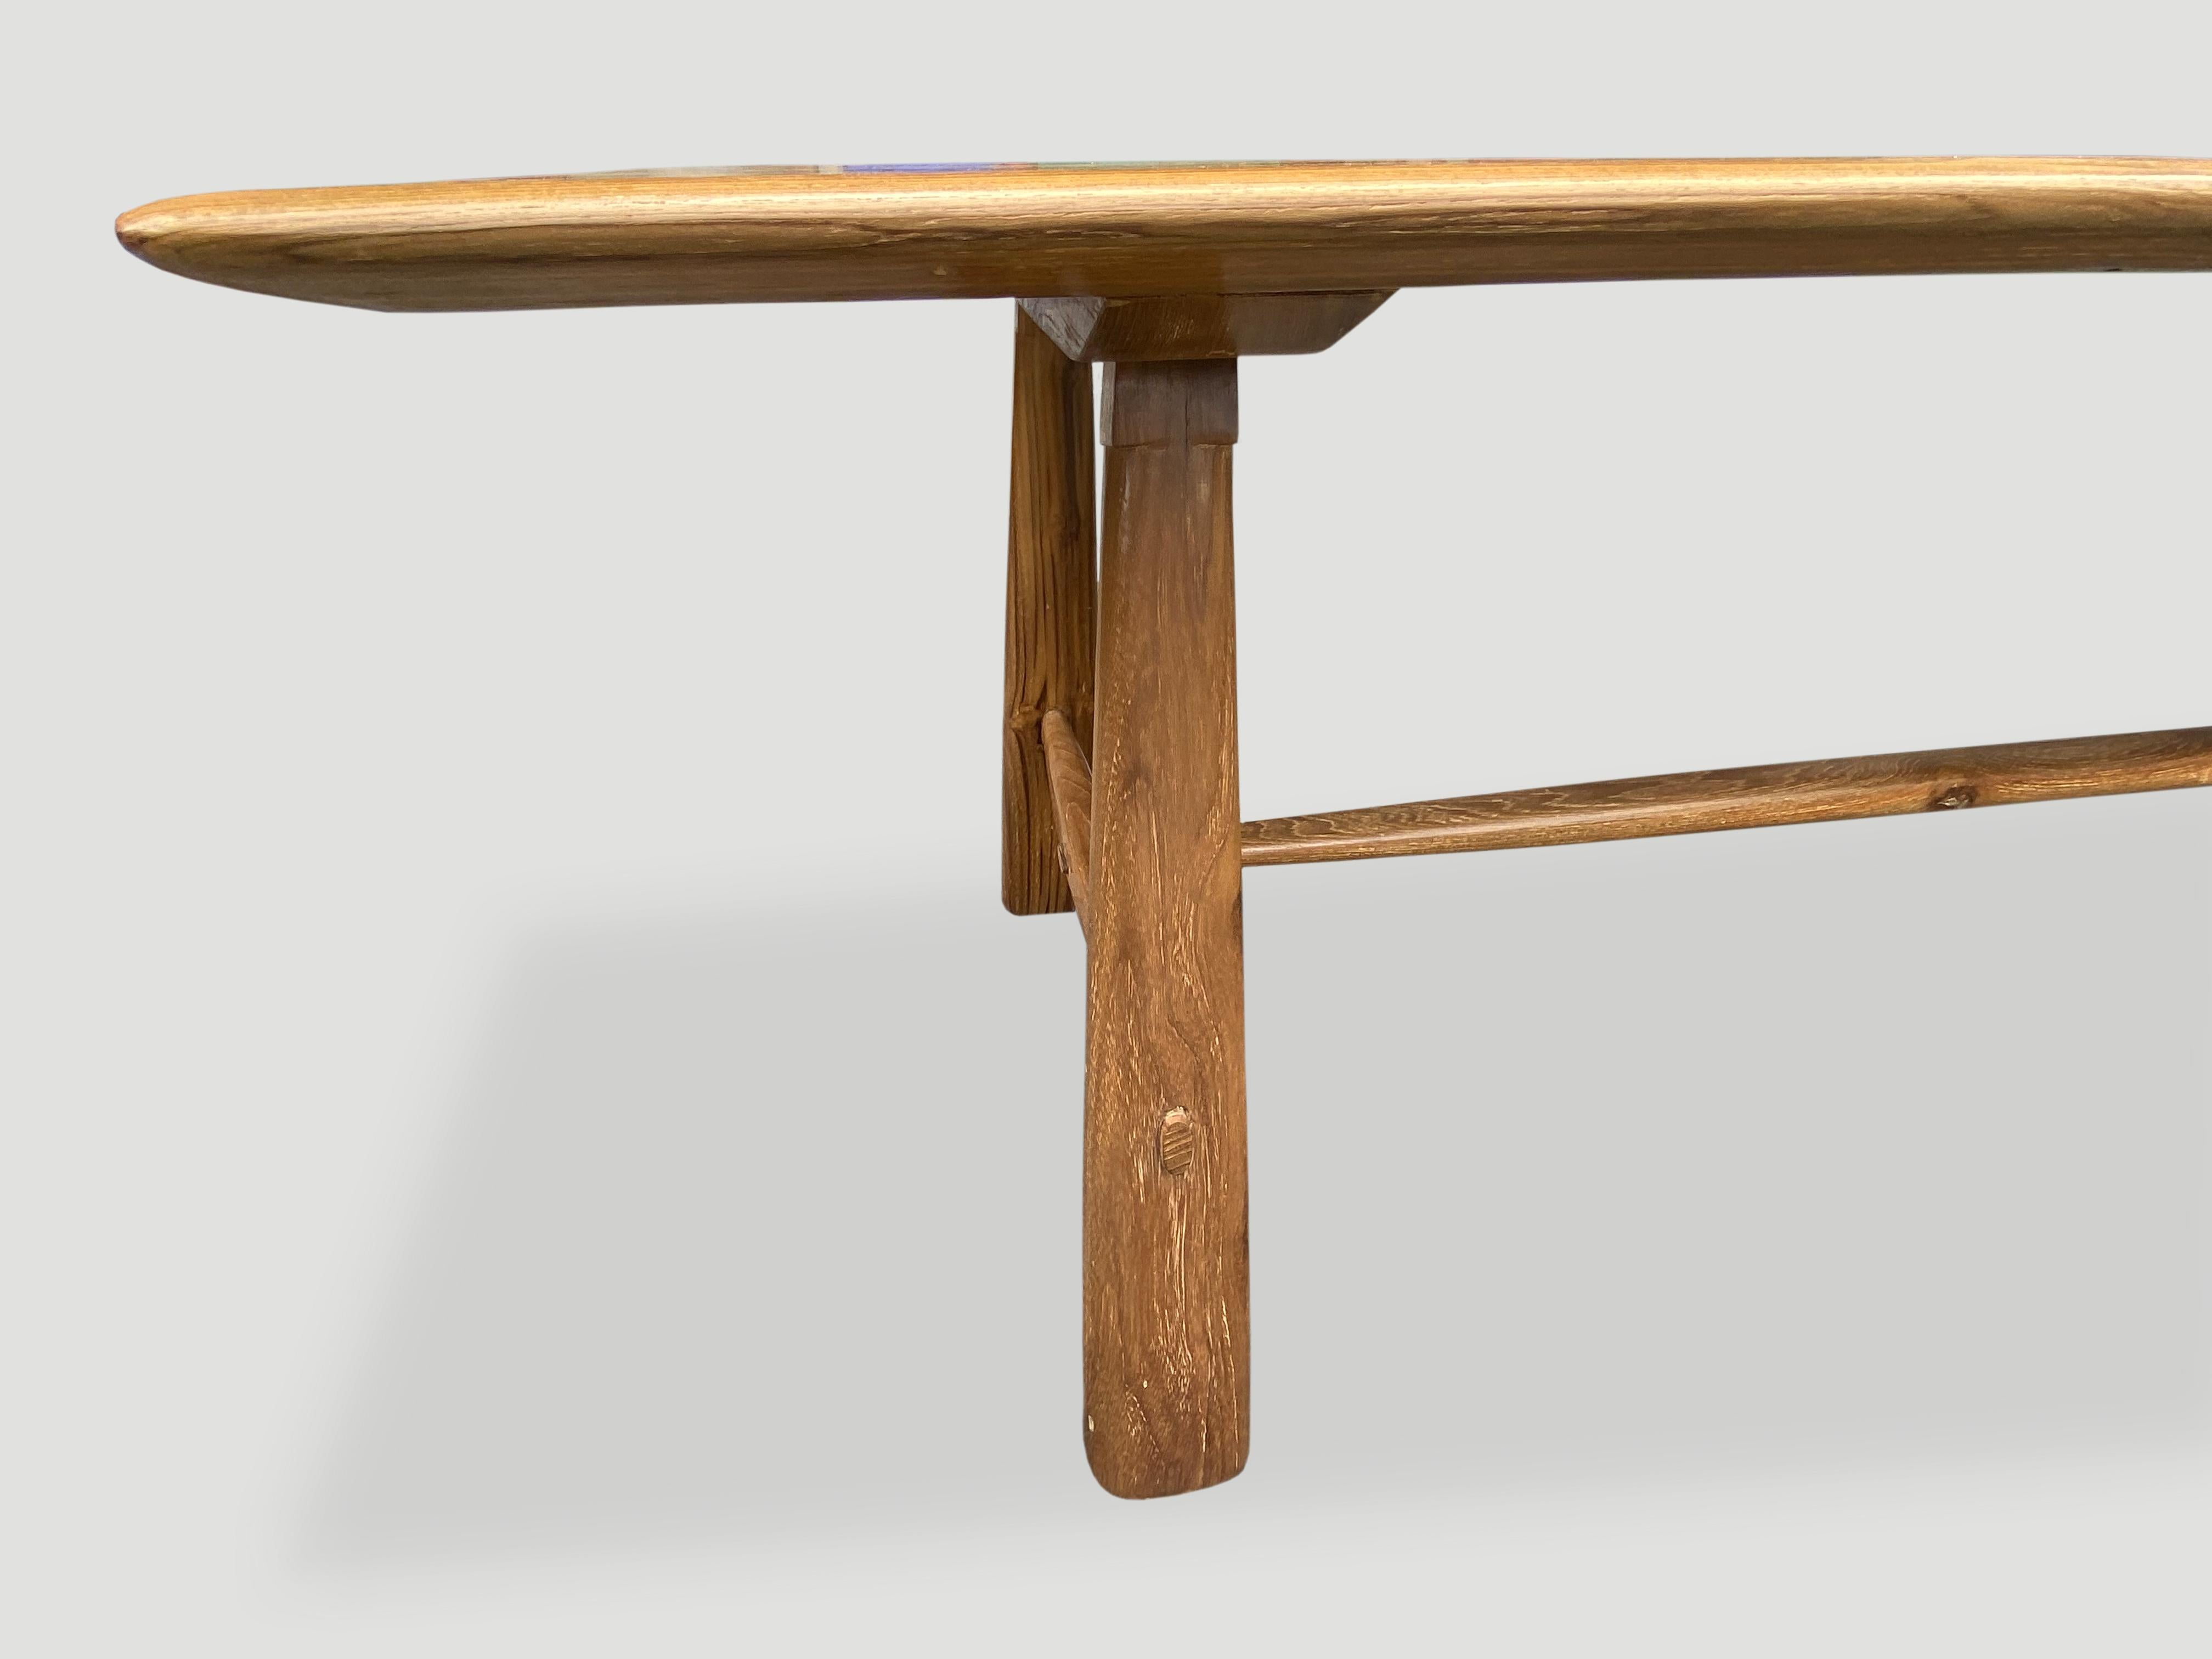 Andrianna Shamaris Midcentury Couture Teak Wood Dining Table For Sale 2